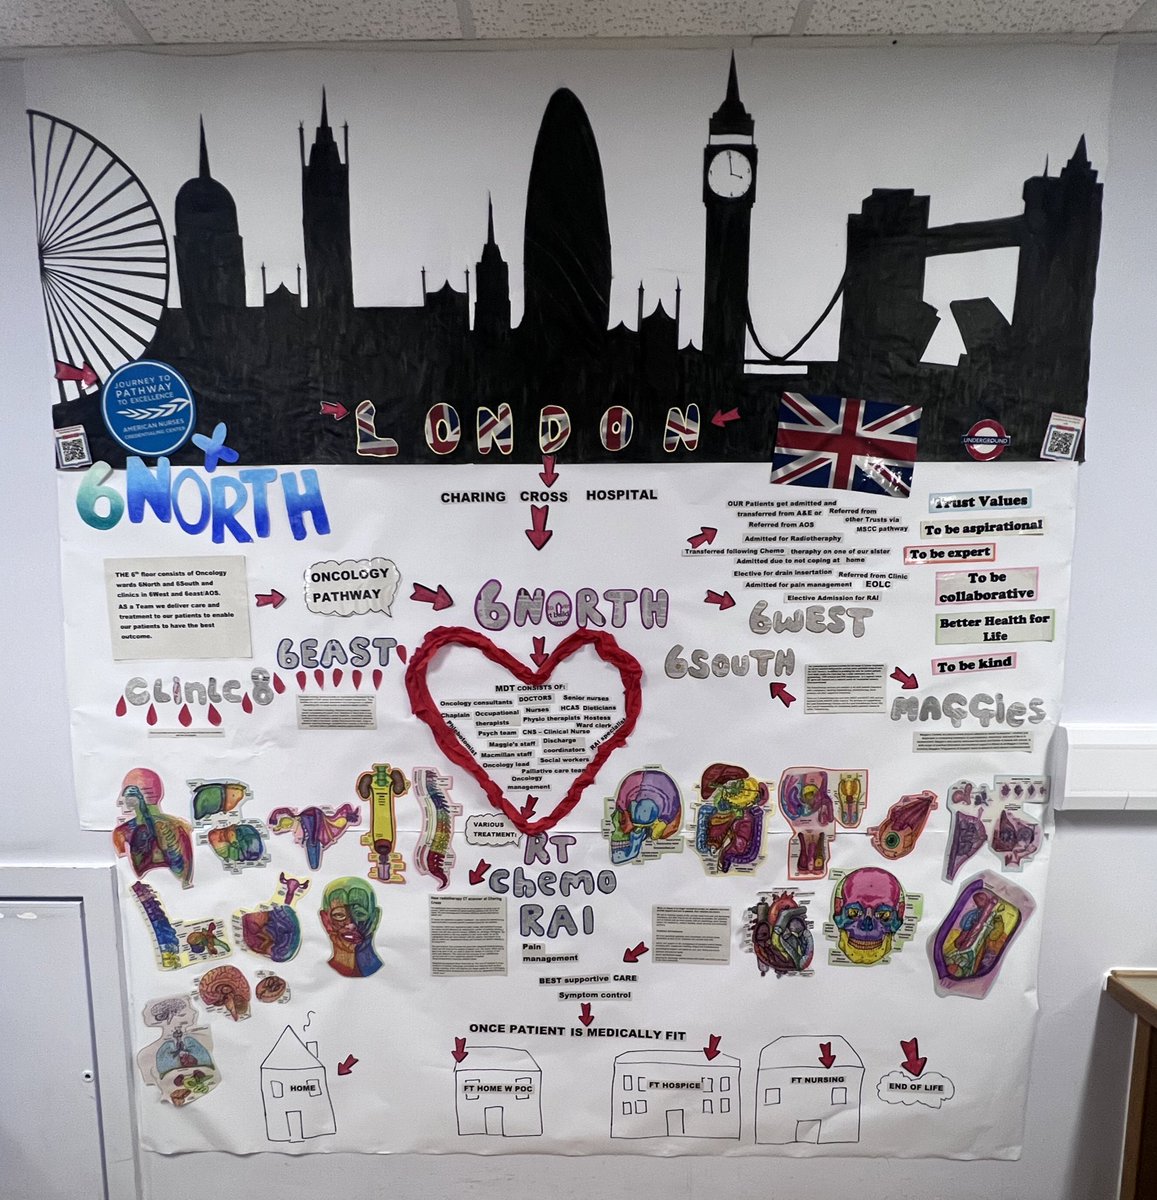 Proud to introduce our 6N Pathway to Excellence display @olulat3 @MLU_1981 @SigsworthJanice @rlukalondon